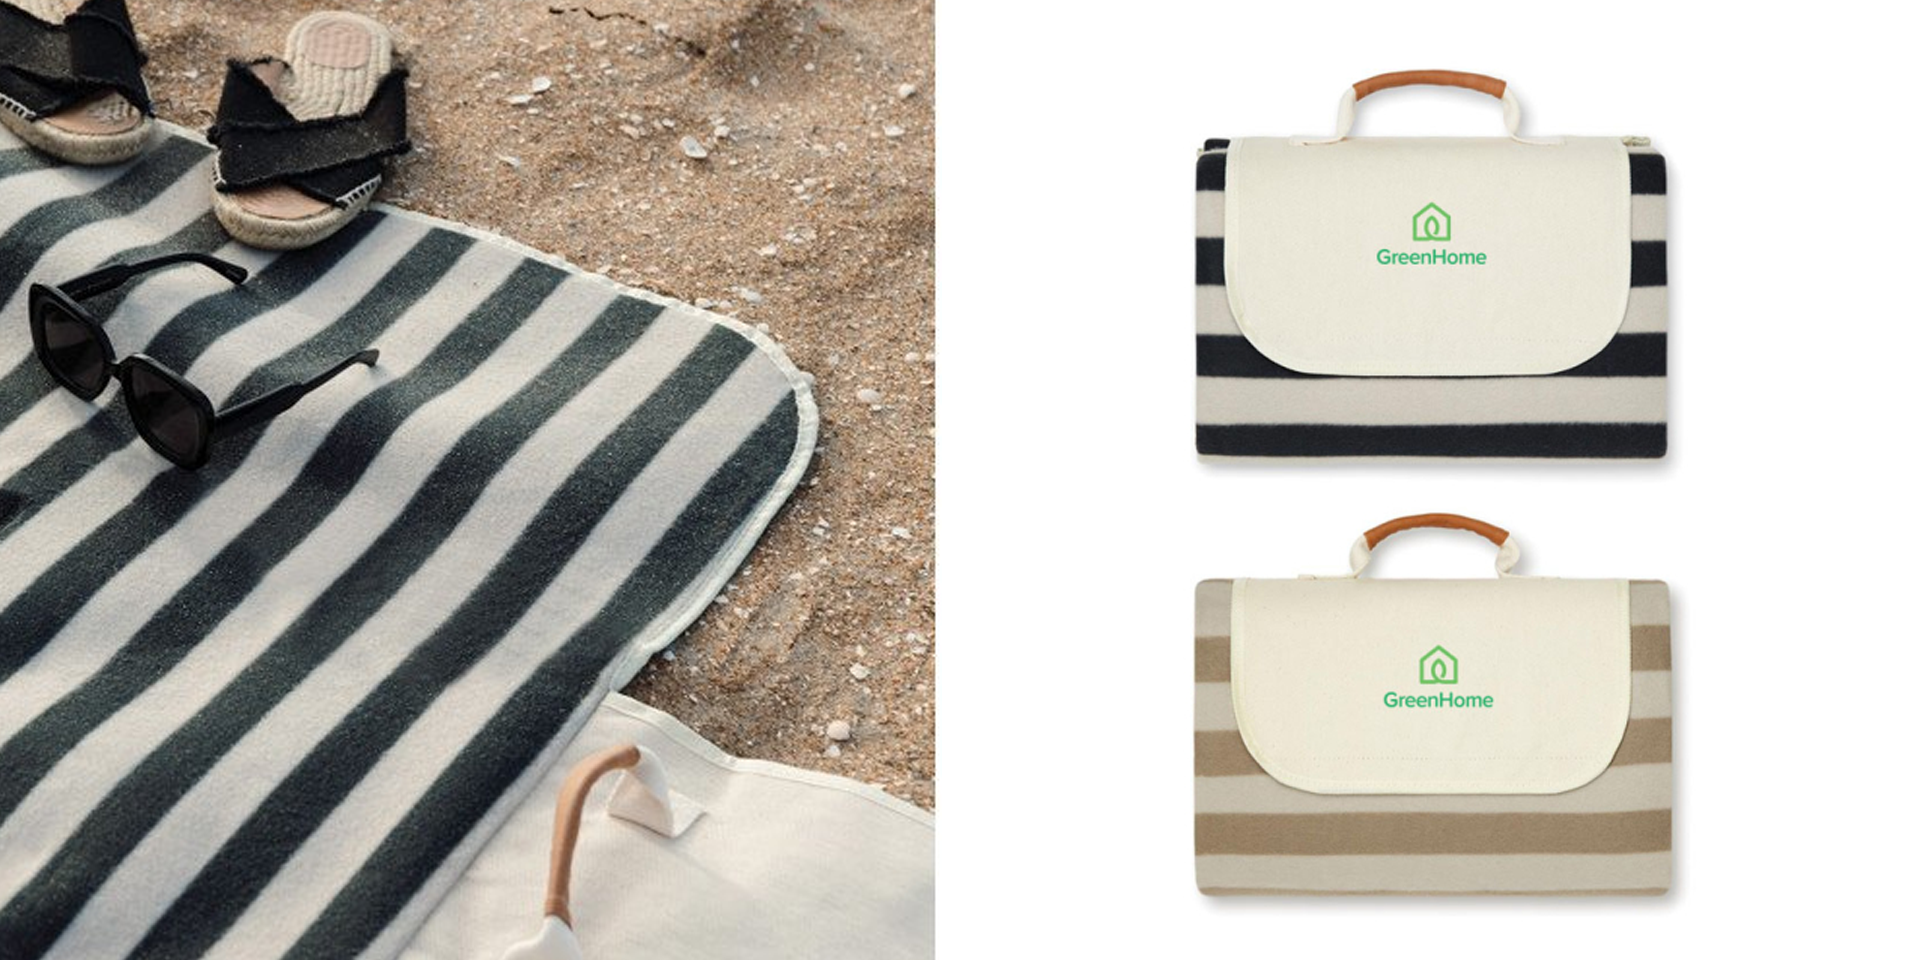 The Alba GRS RPET picnic blanket combines style, comfort, and sustainability, making it an excellent choice for outdoor activities